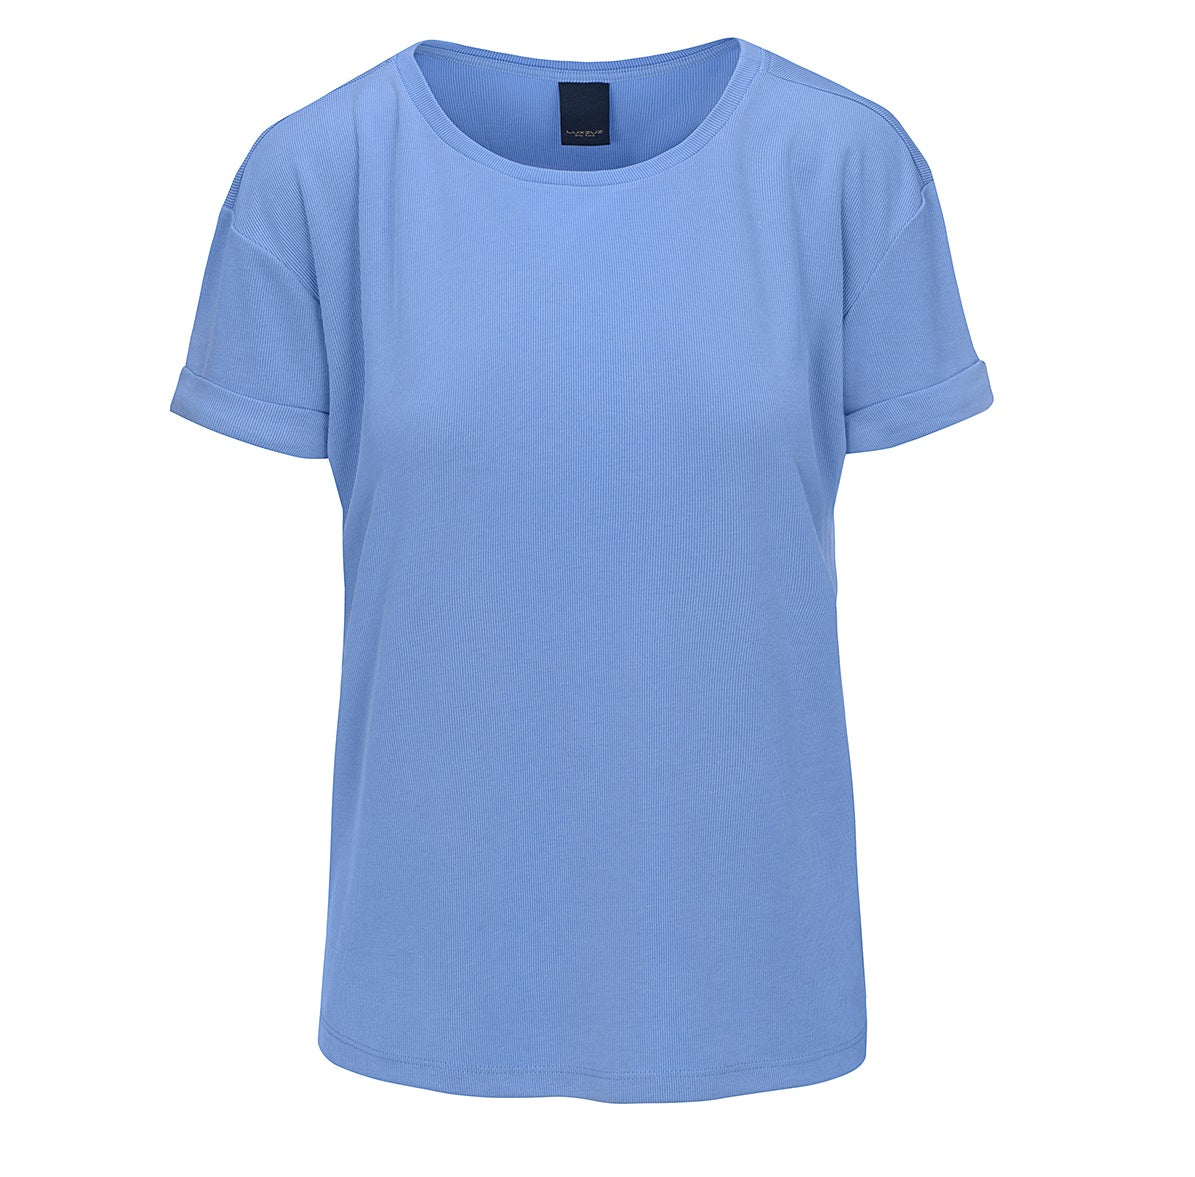 LUXZUZ // ONE TWO Karin T-Shirt 514 Cashmere Blue